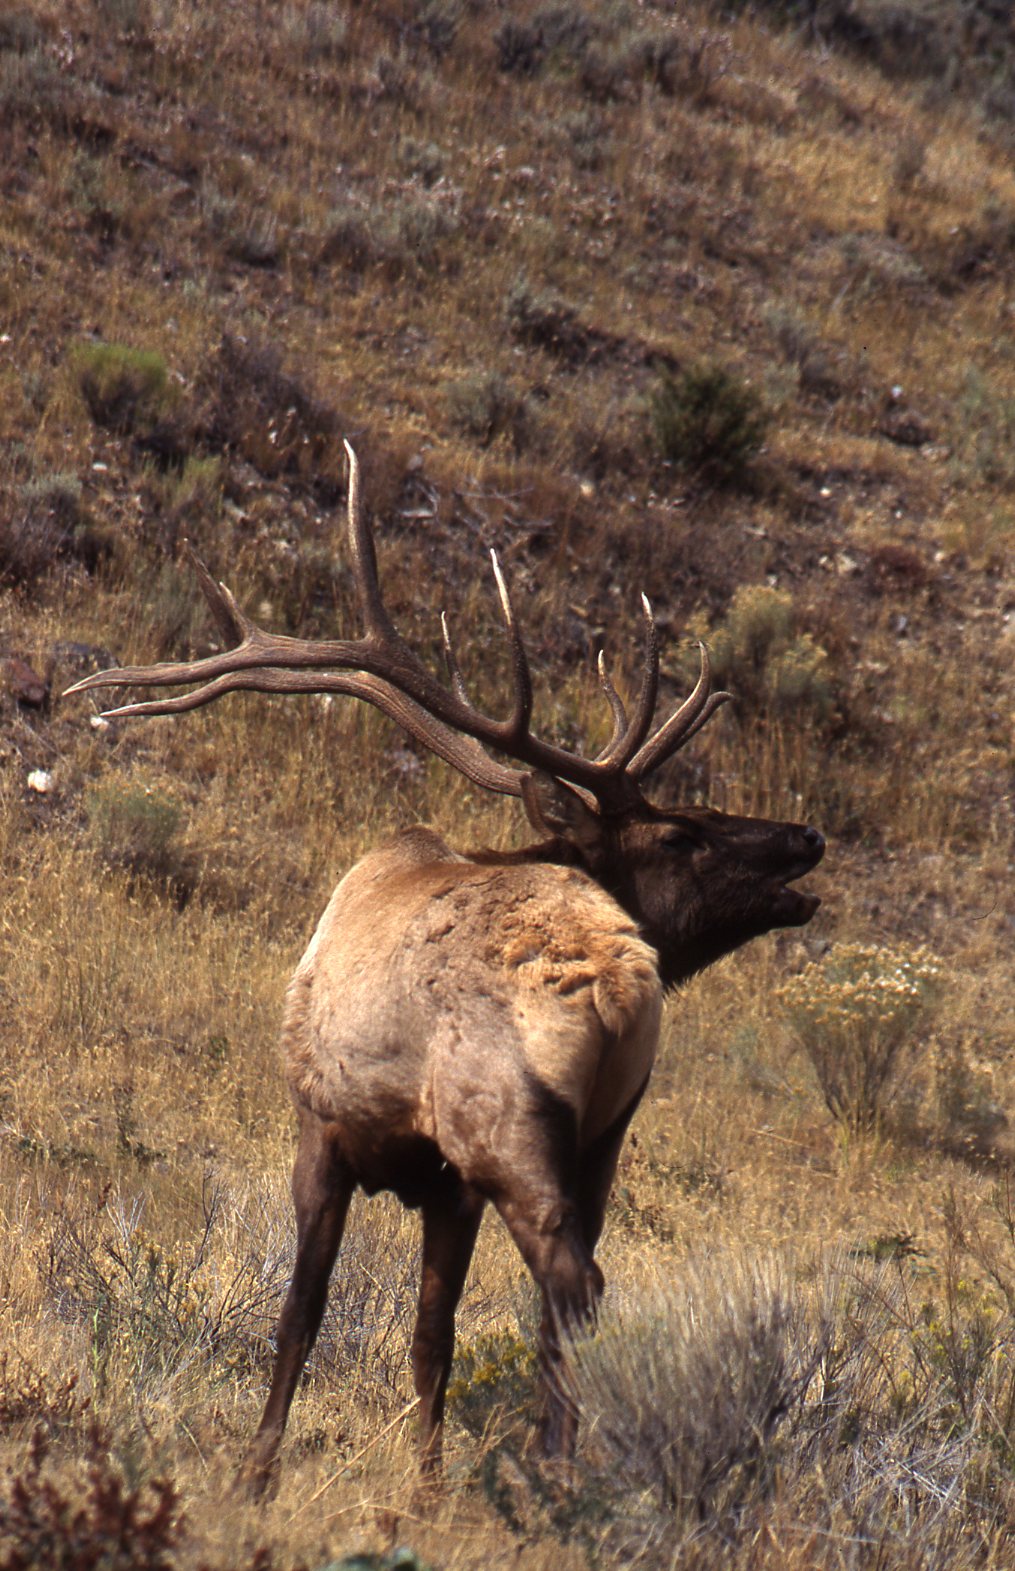 Elk Season Approved for Oklahoma Griffin's Guide to Hunting and Fishing